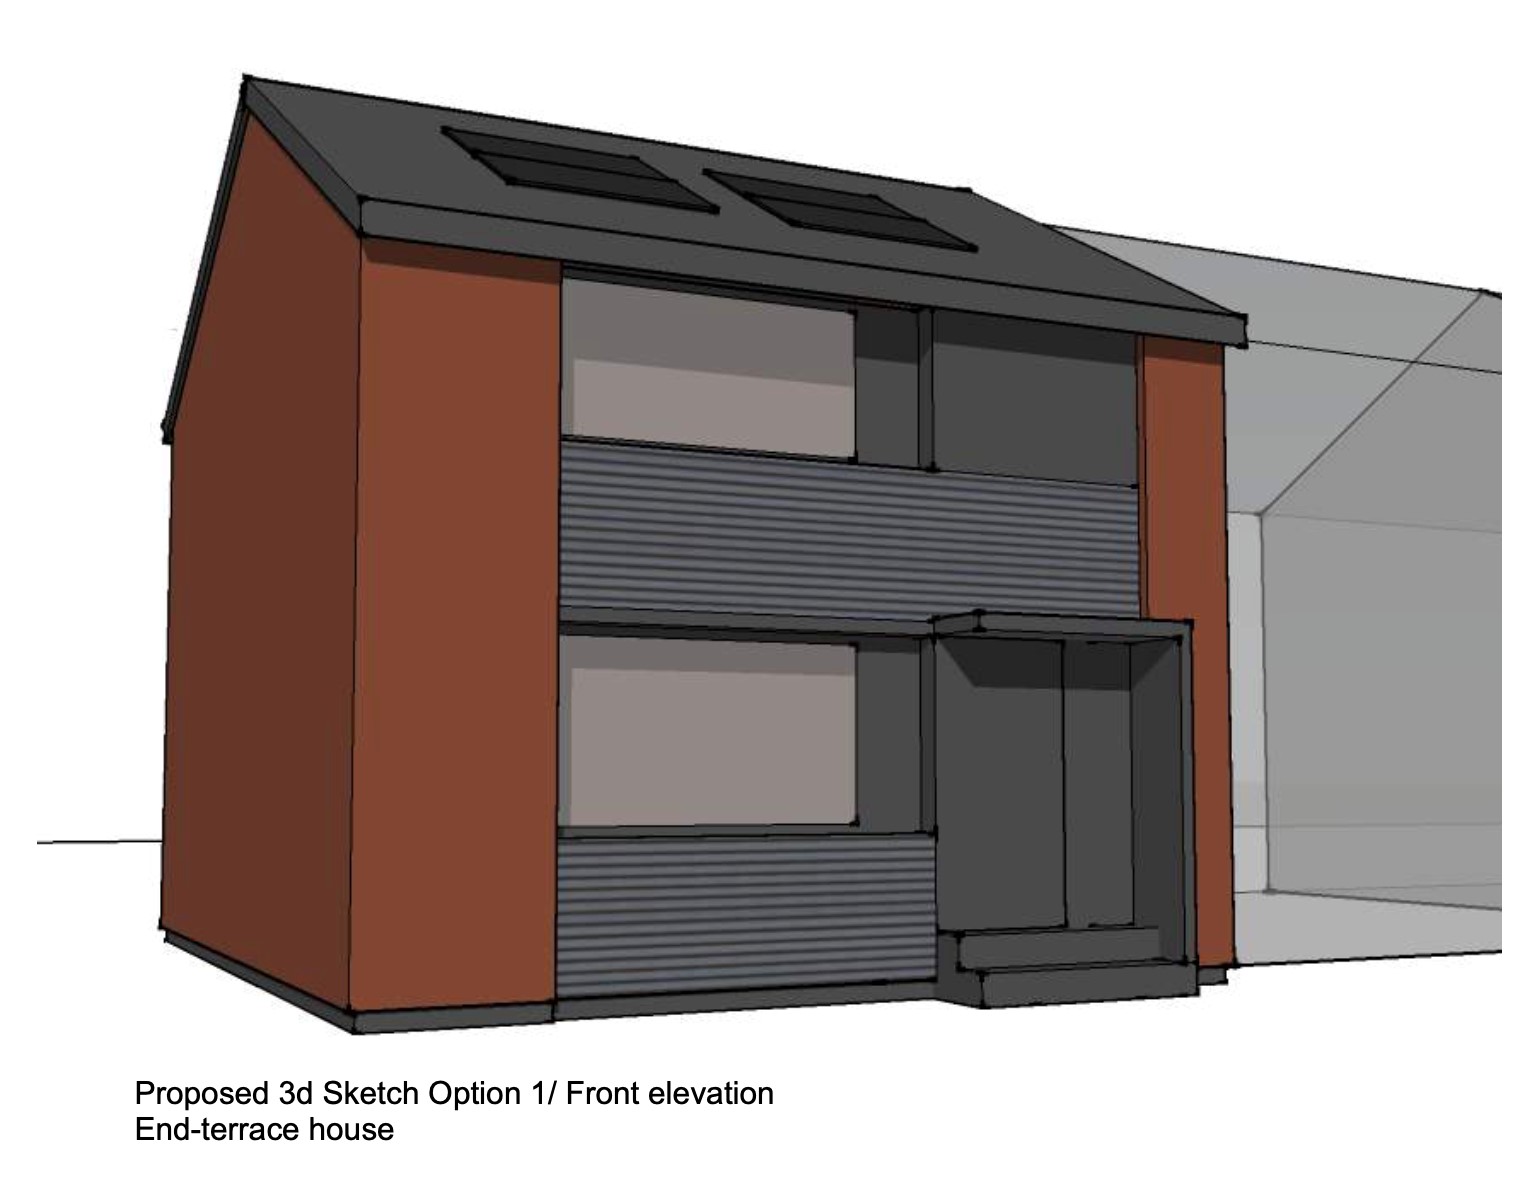 Proposed front elevation